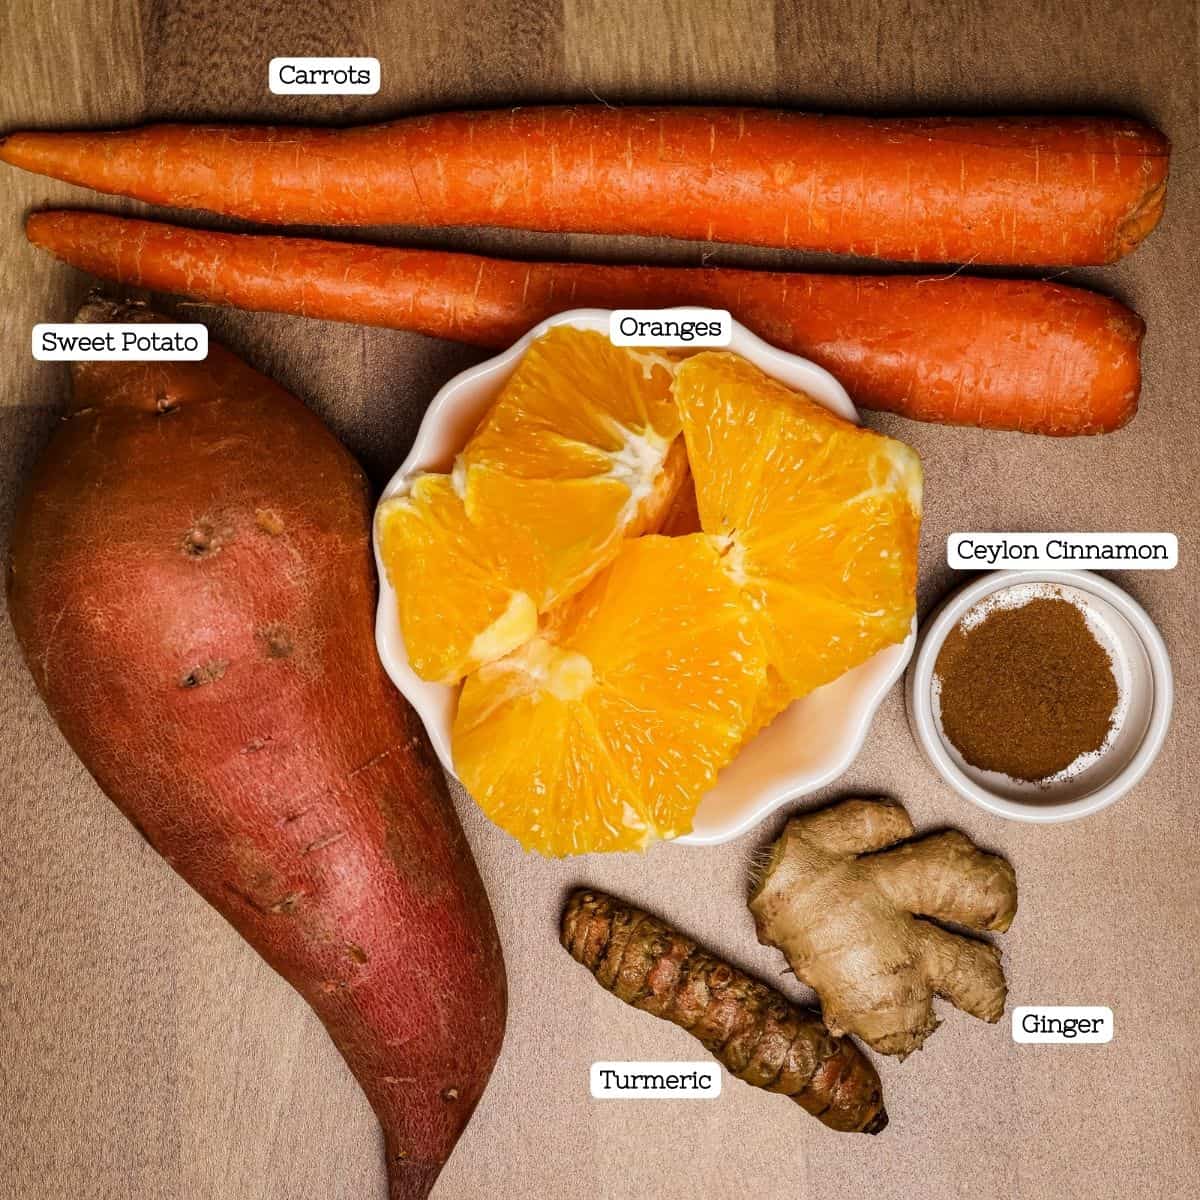 Labeled ingredients for sweet potato juice neatly arranged on a brown surface: whole sweet potato, carrots, orange segments, a piece of turmeric, ginger root, and a bowl of ground Ceylon cinnamon.